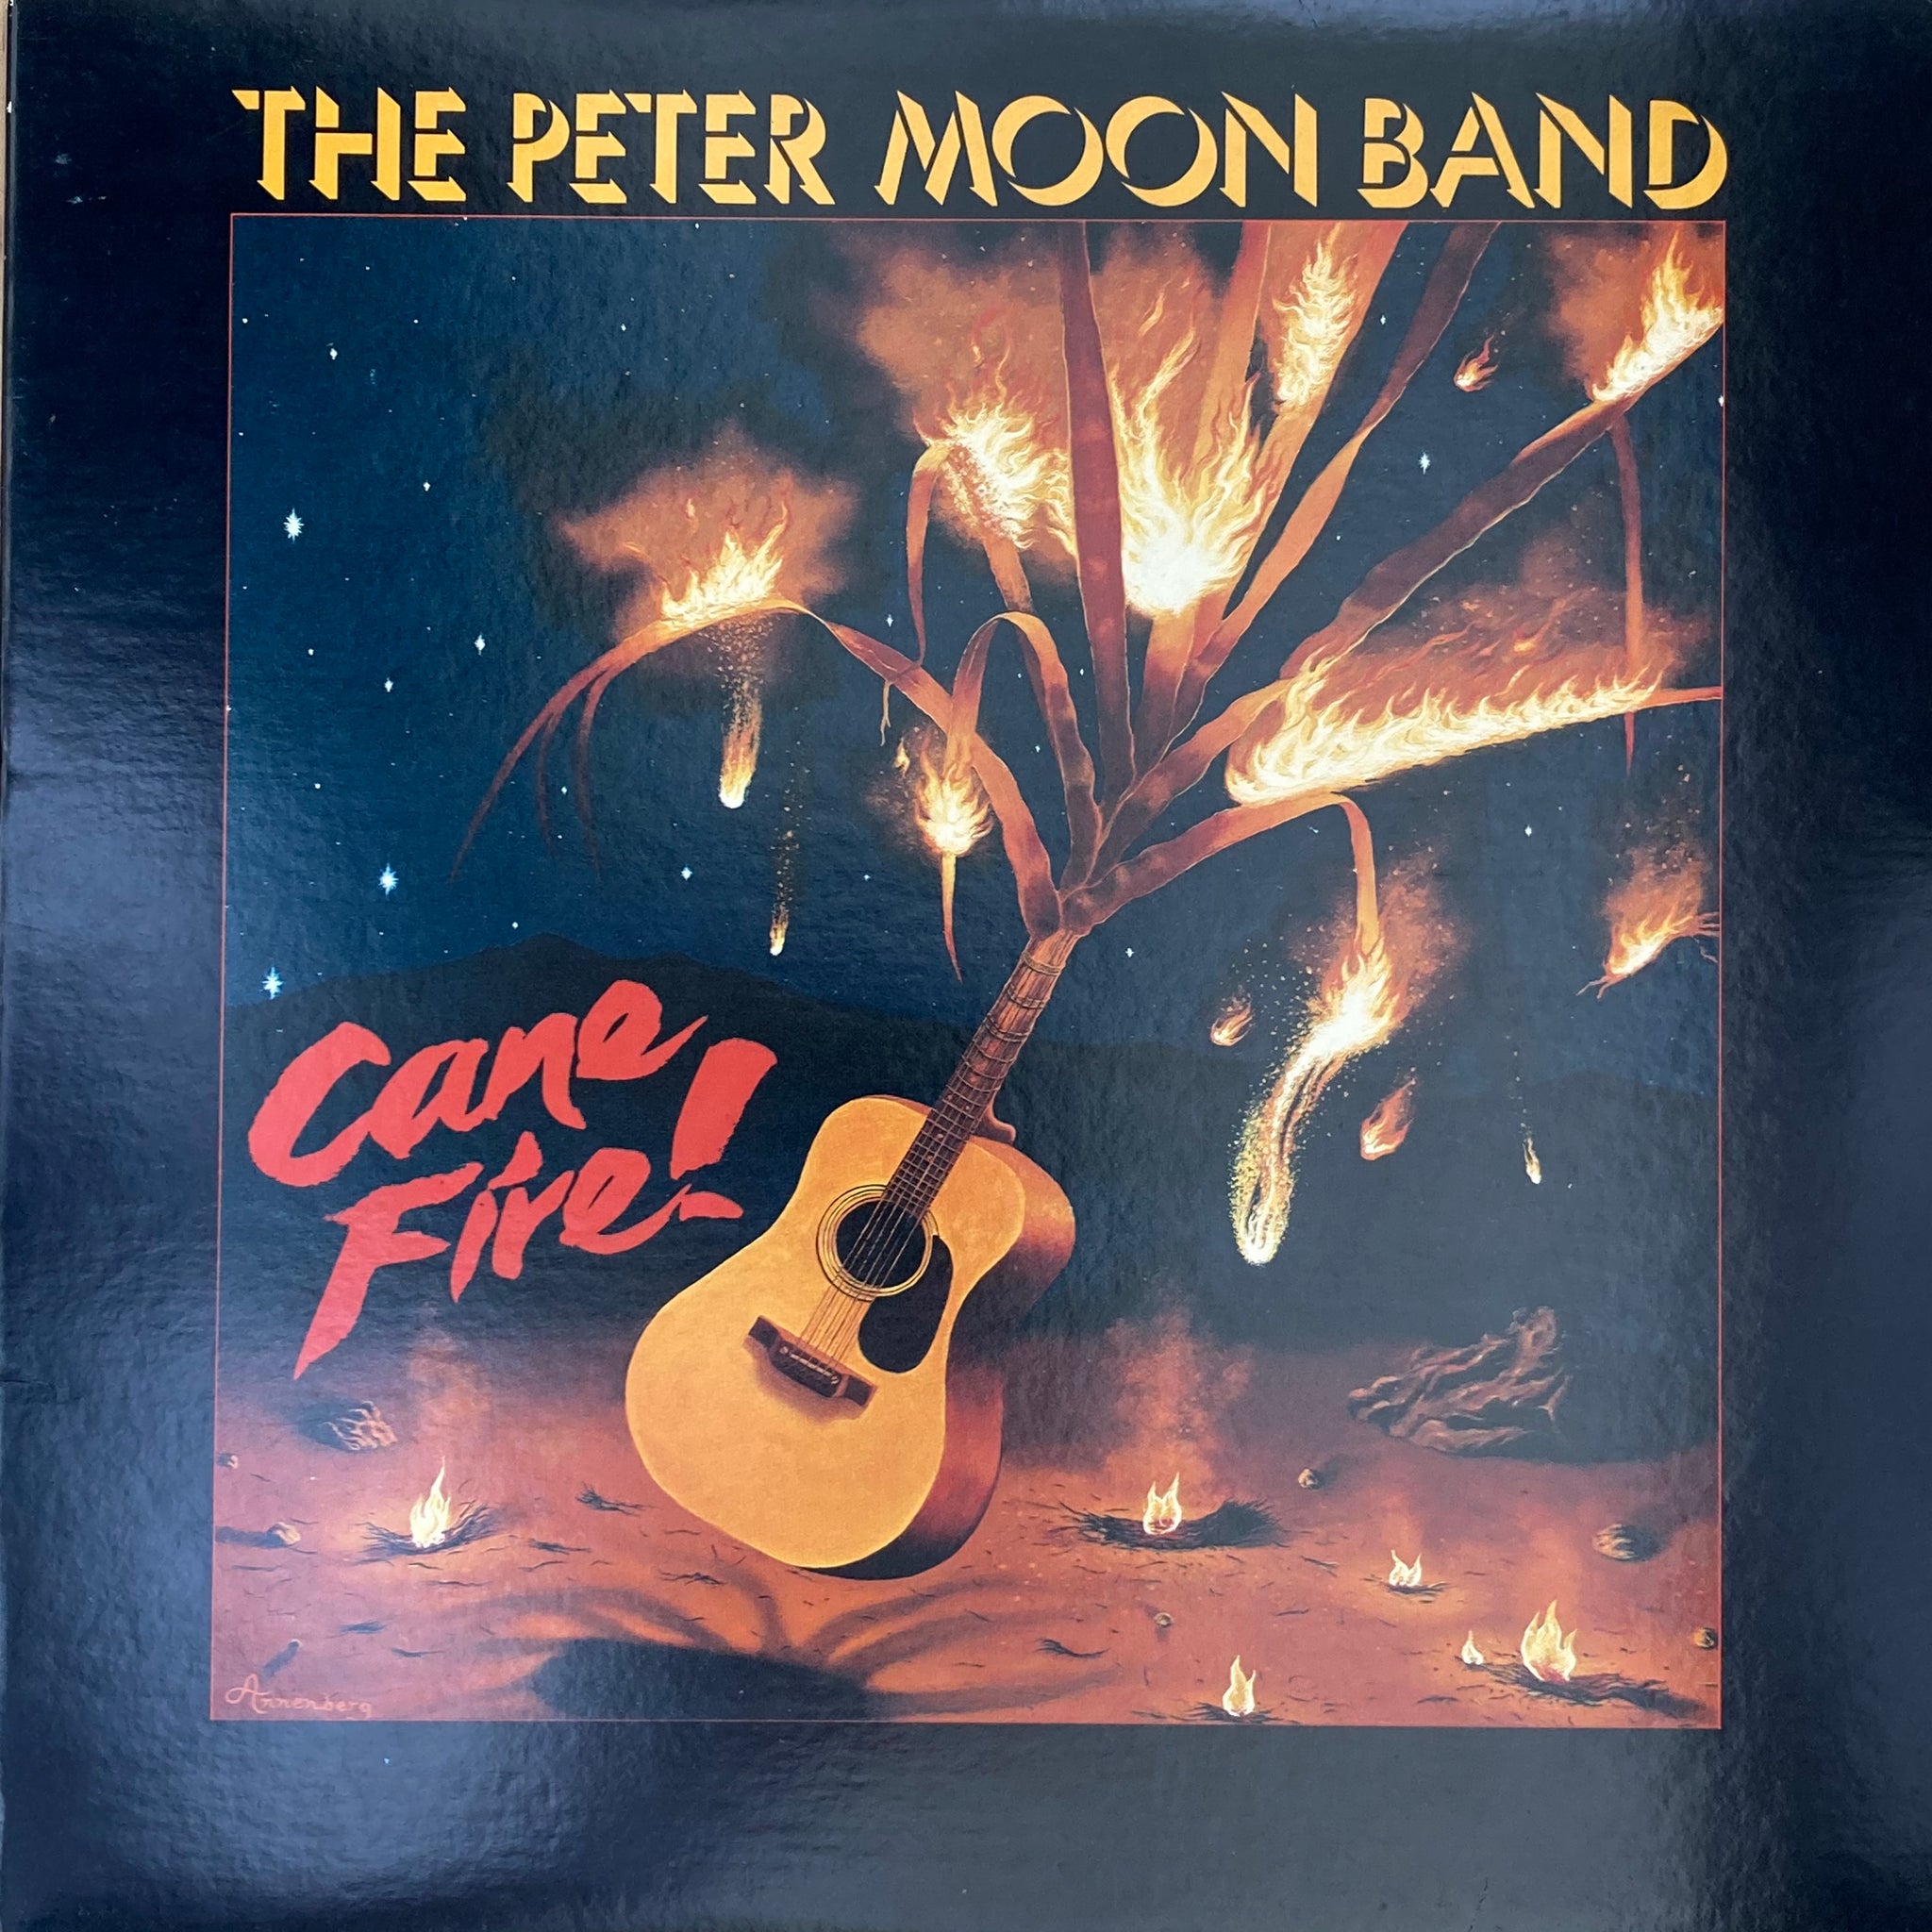 The Peter Moon Band - Cane Fire!